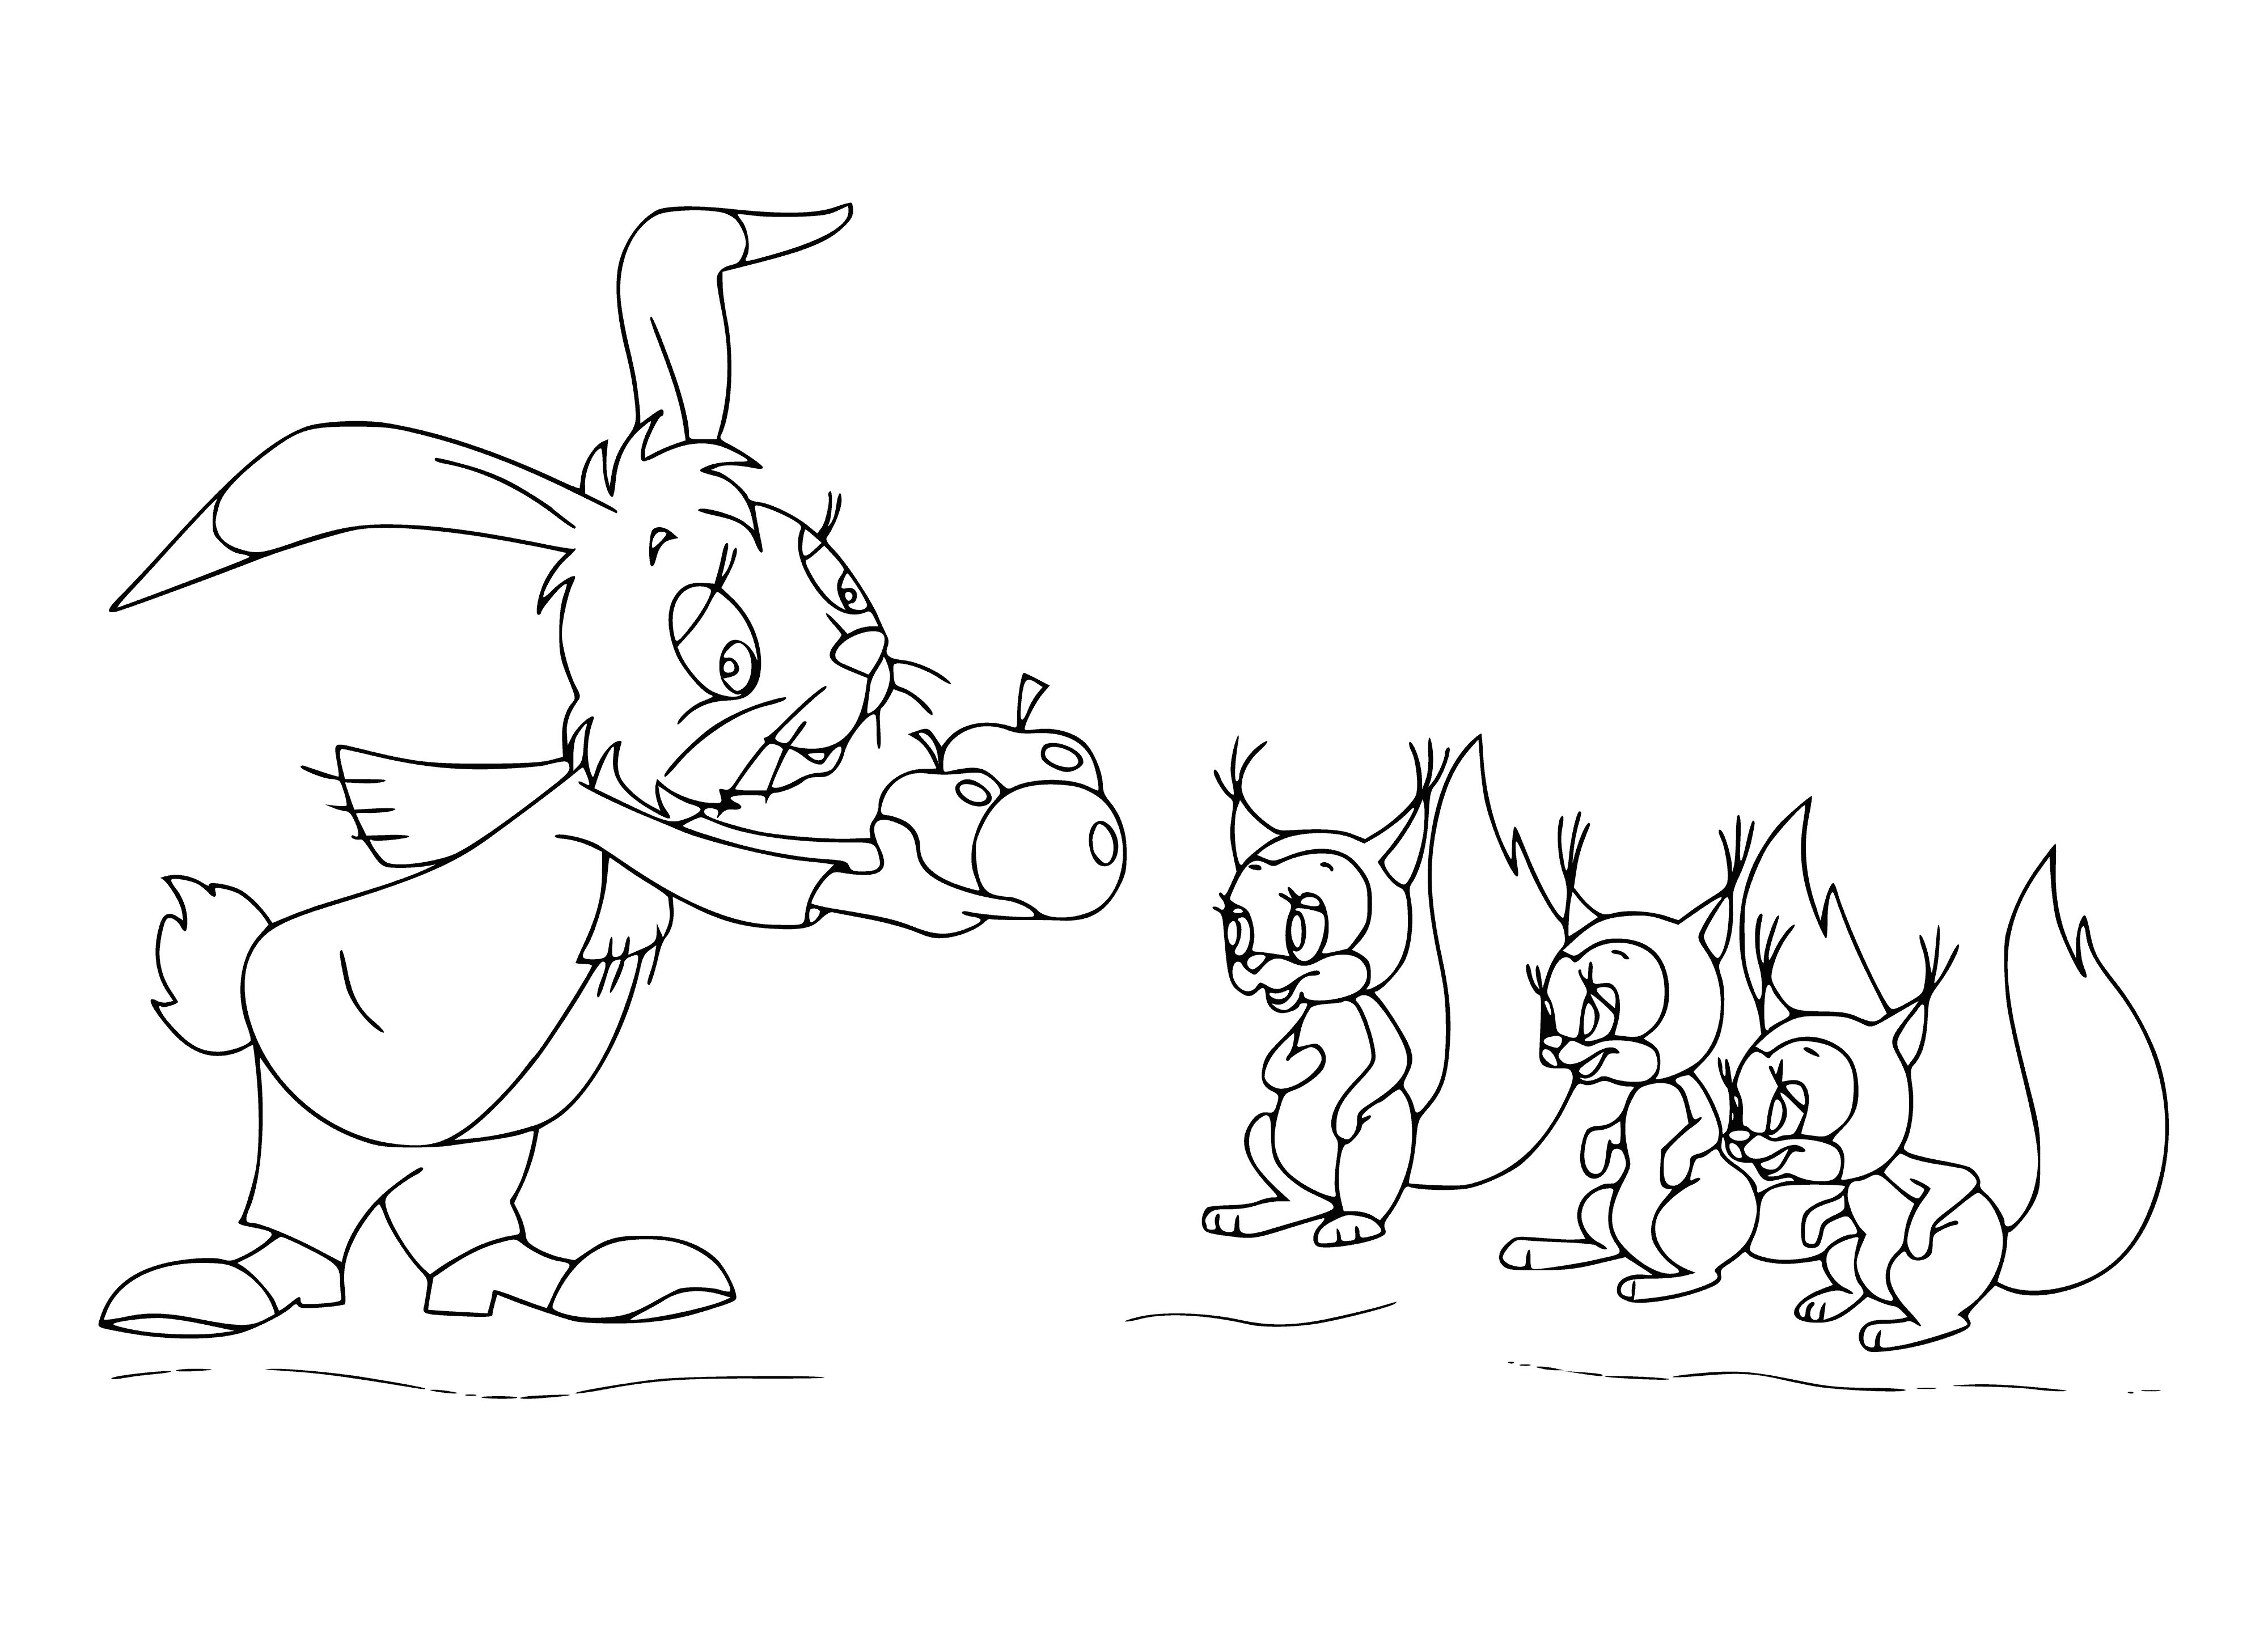 coloring page: Hare gives apple to squirrel, gets a nut in return. Both parties happy.